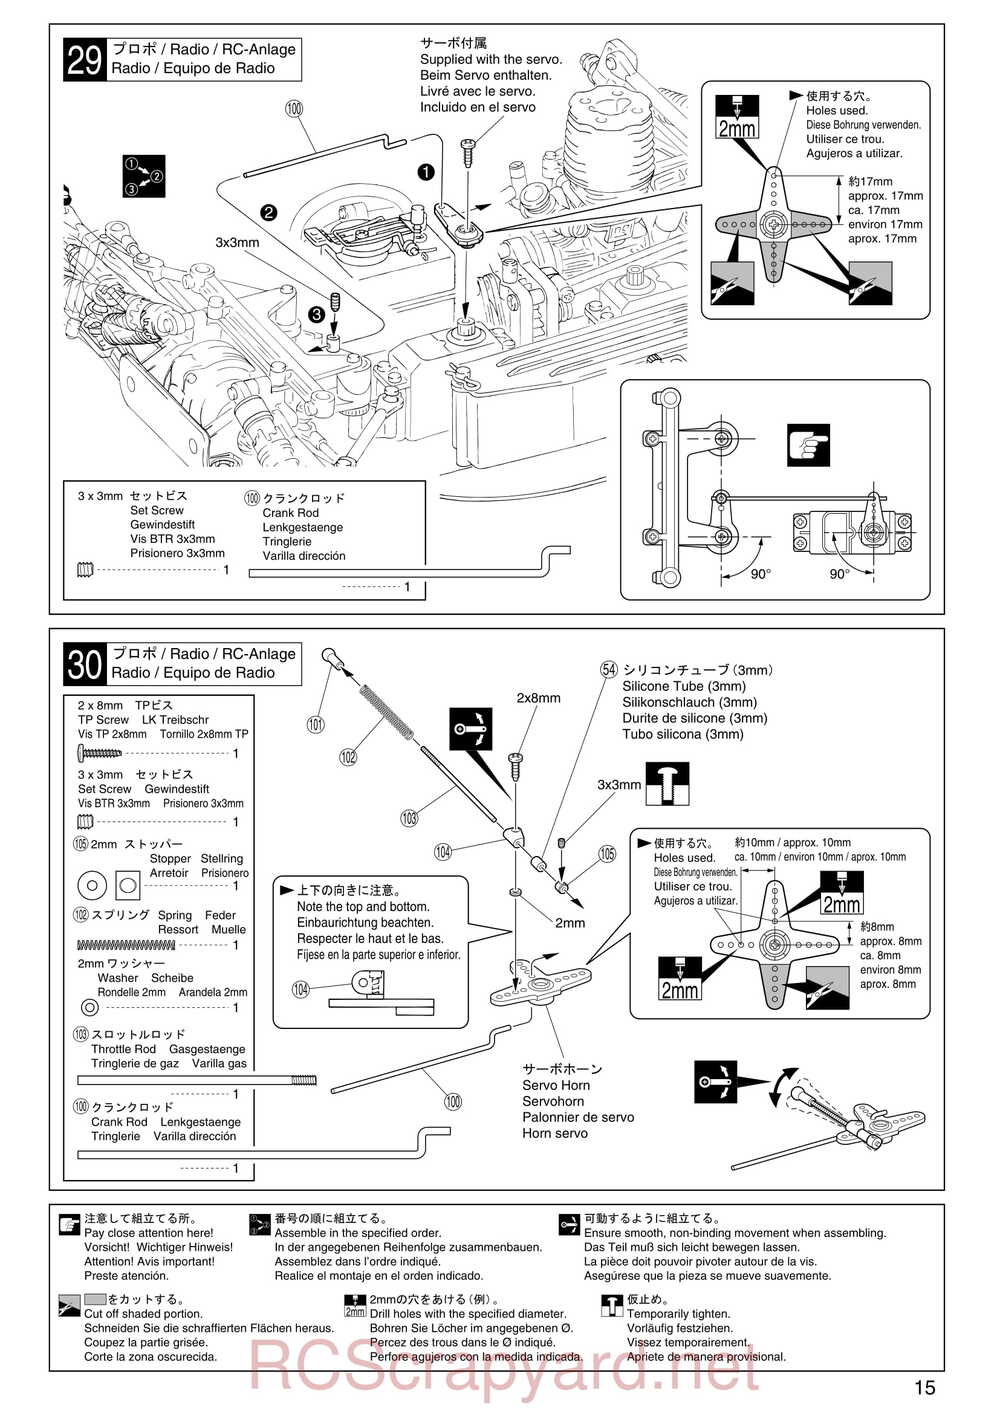 Kyosho - 31095 - TR-15 Stadium-Force - Manual - Page 15